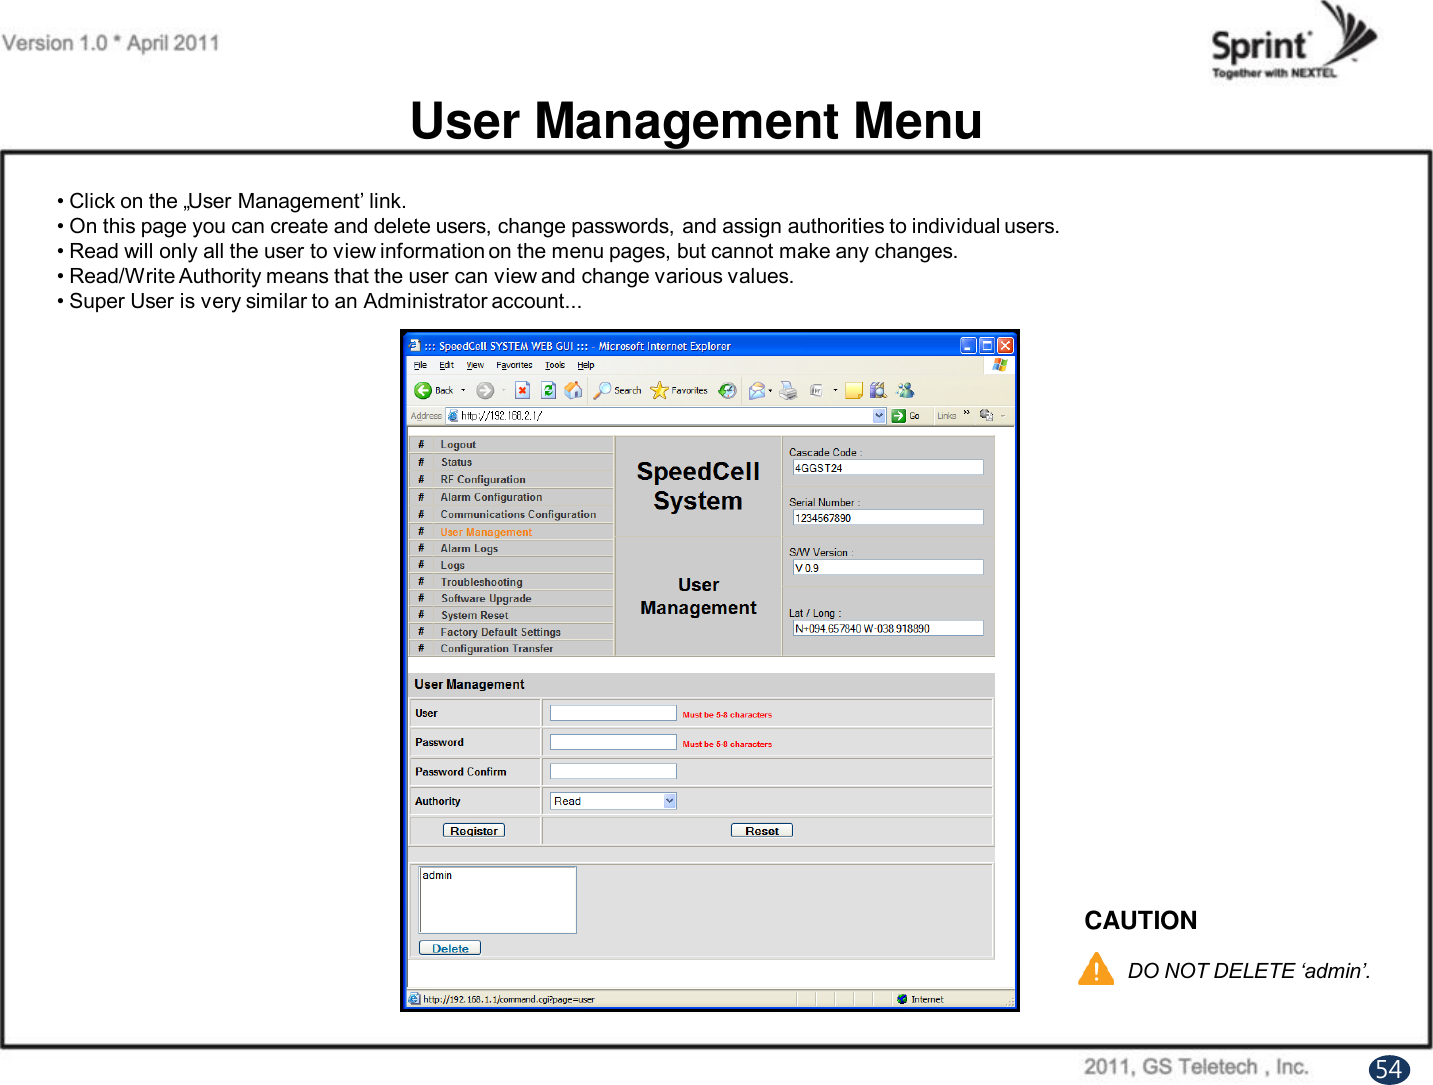 User Management MenuCAUTIONDO NOT DELETE ‘admin’.• Click on the „User Management‟ link.• On this page you can create and delete users, change passwords, and assign authorities to individual users.• Read will only all the user to view information on the menu pages, but cannot make any changes.• Read/Write Authority means that the user can view and change various values.• Super User is very similar to an Administrator account...54